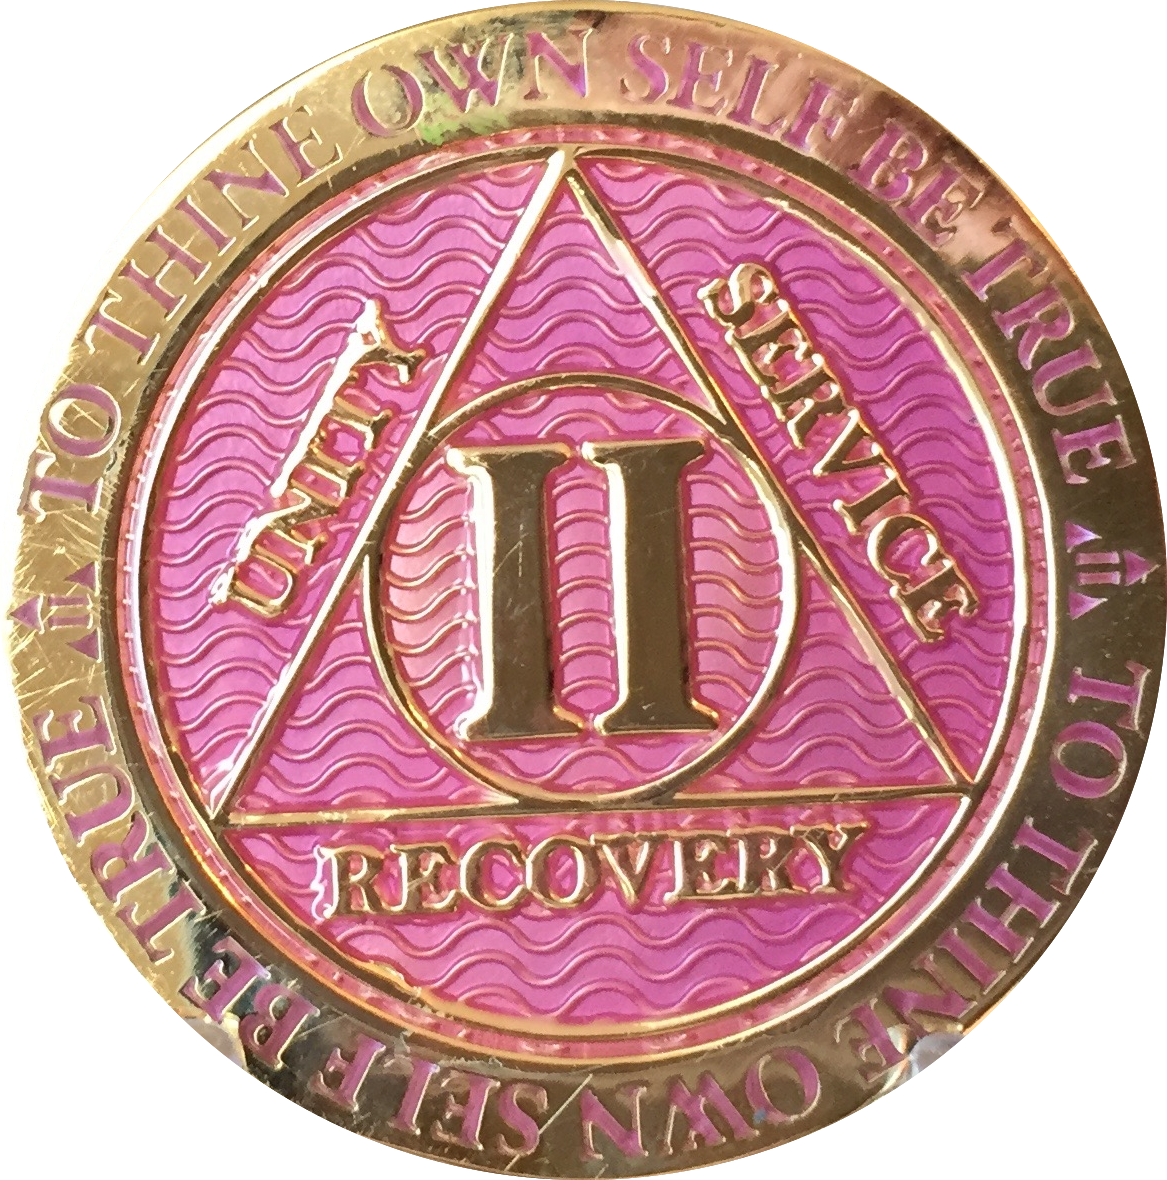 2 Year AA Medallion Lavender Pink Gold Alcoholics Anonymous Sobriety Chip Coin